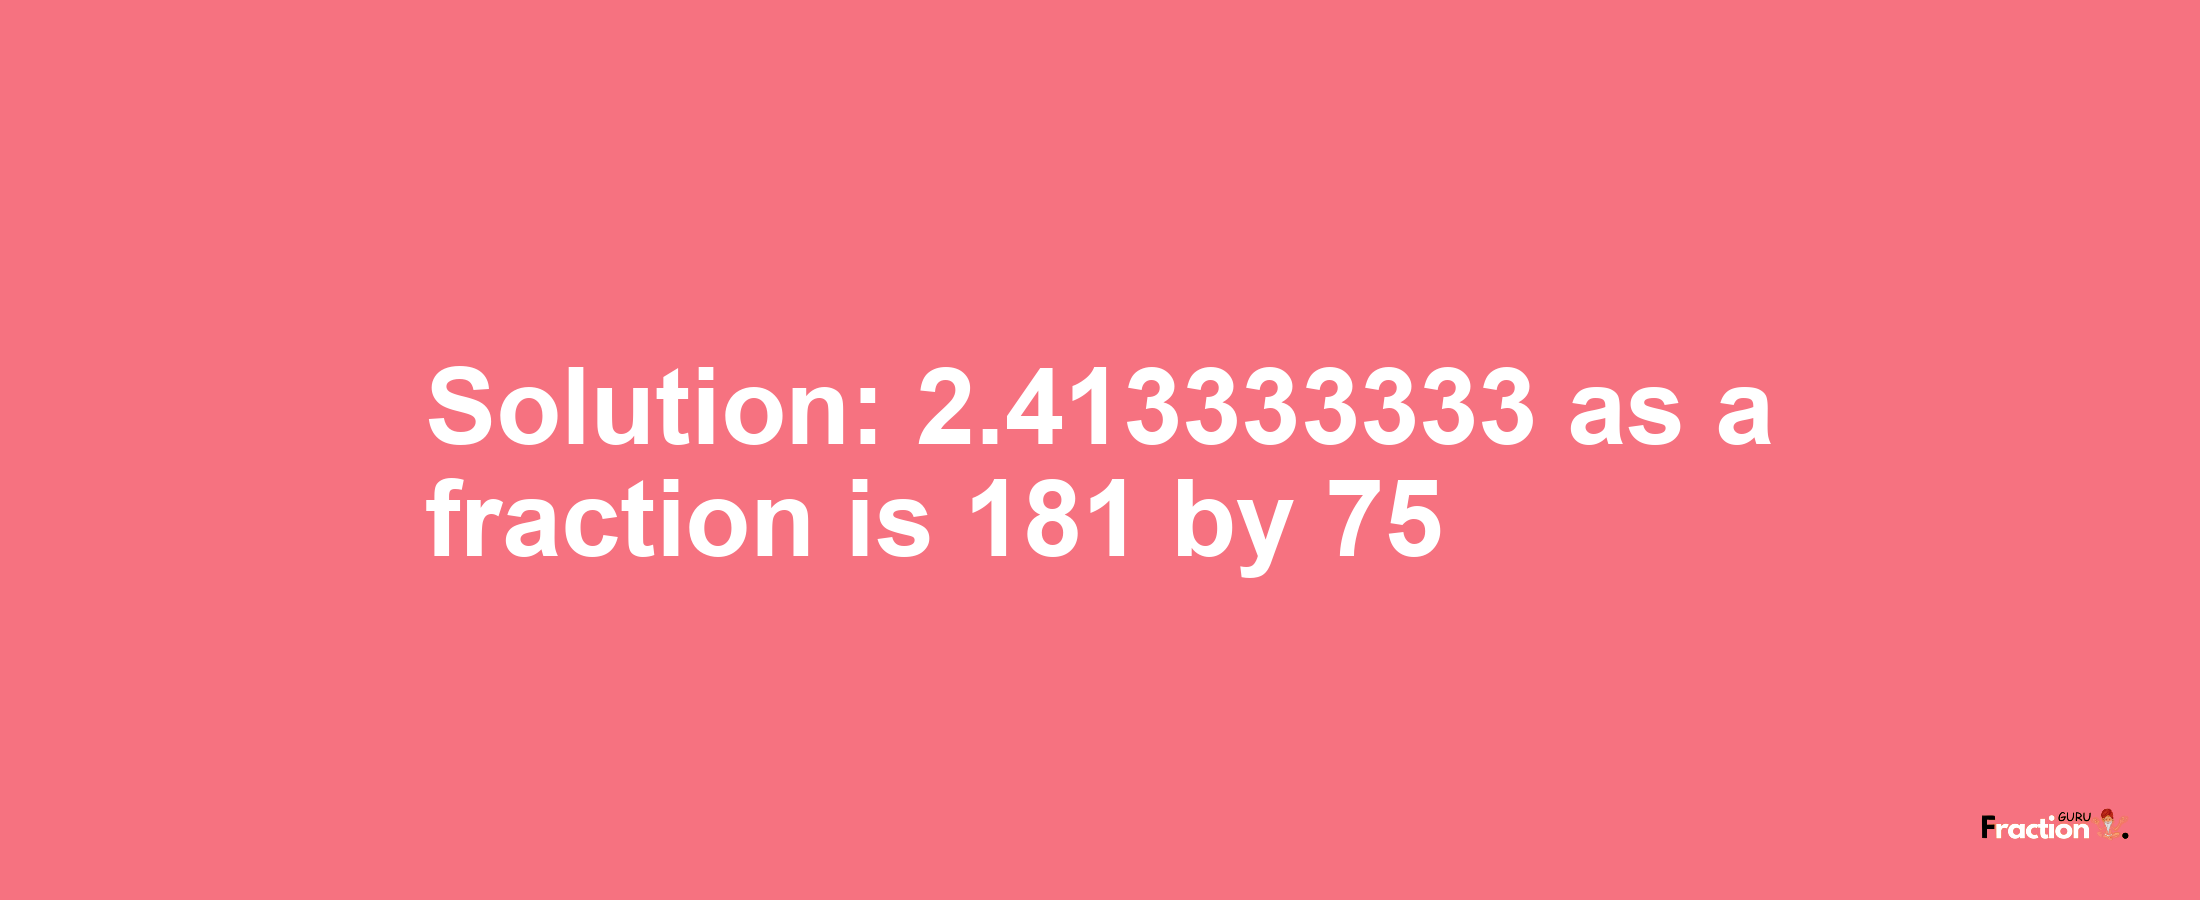 Solution:2.413333333 as a fraction is 181/75